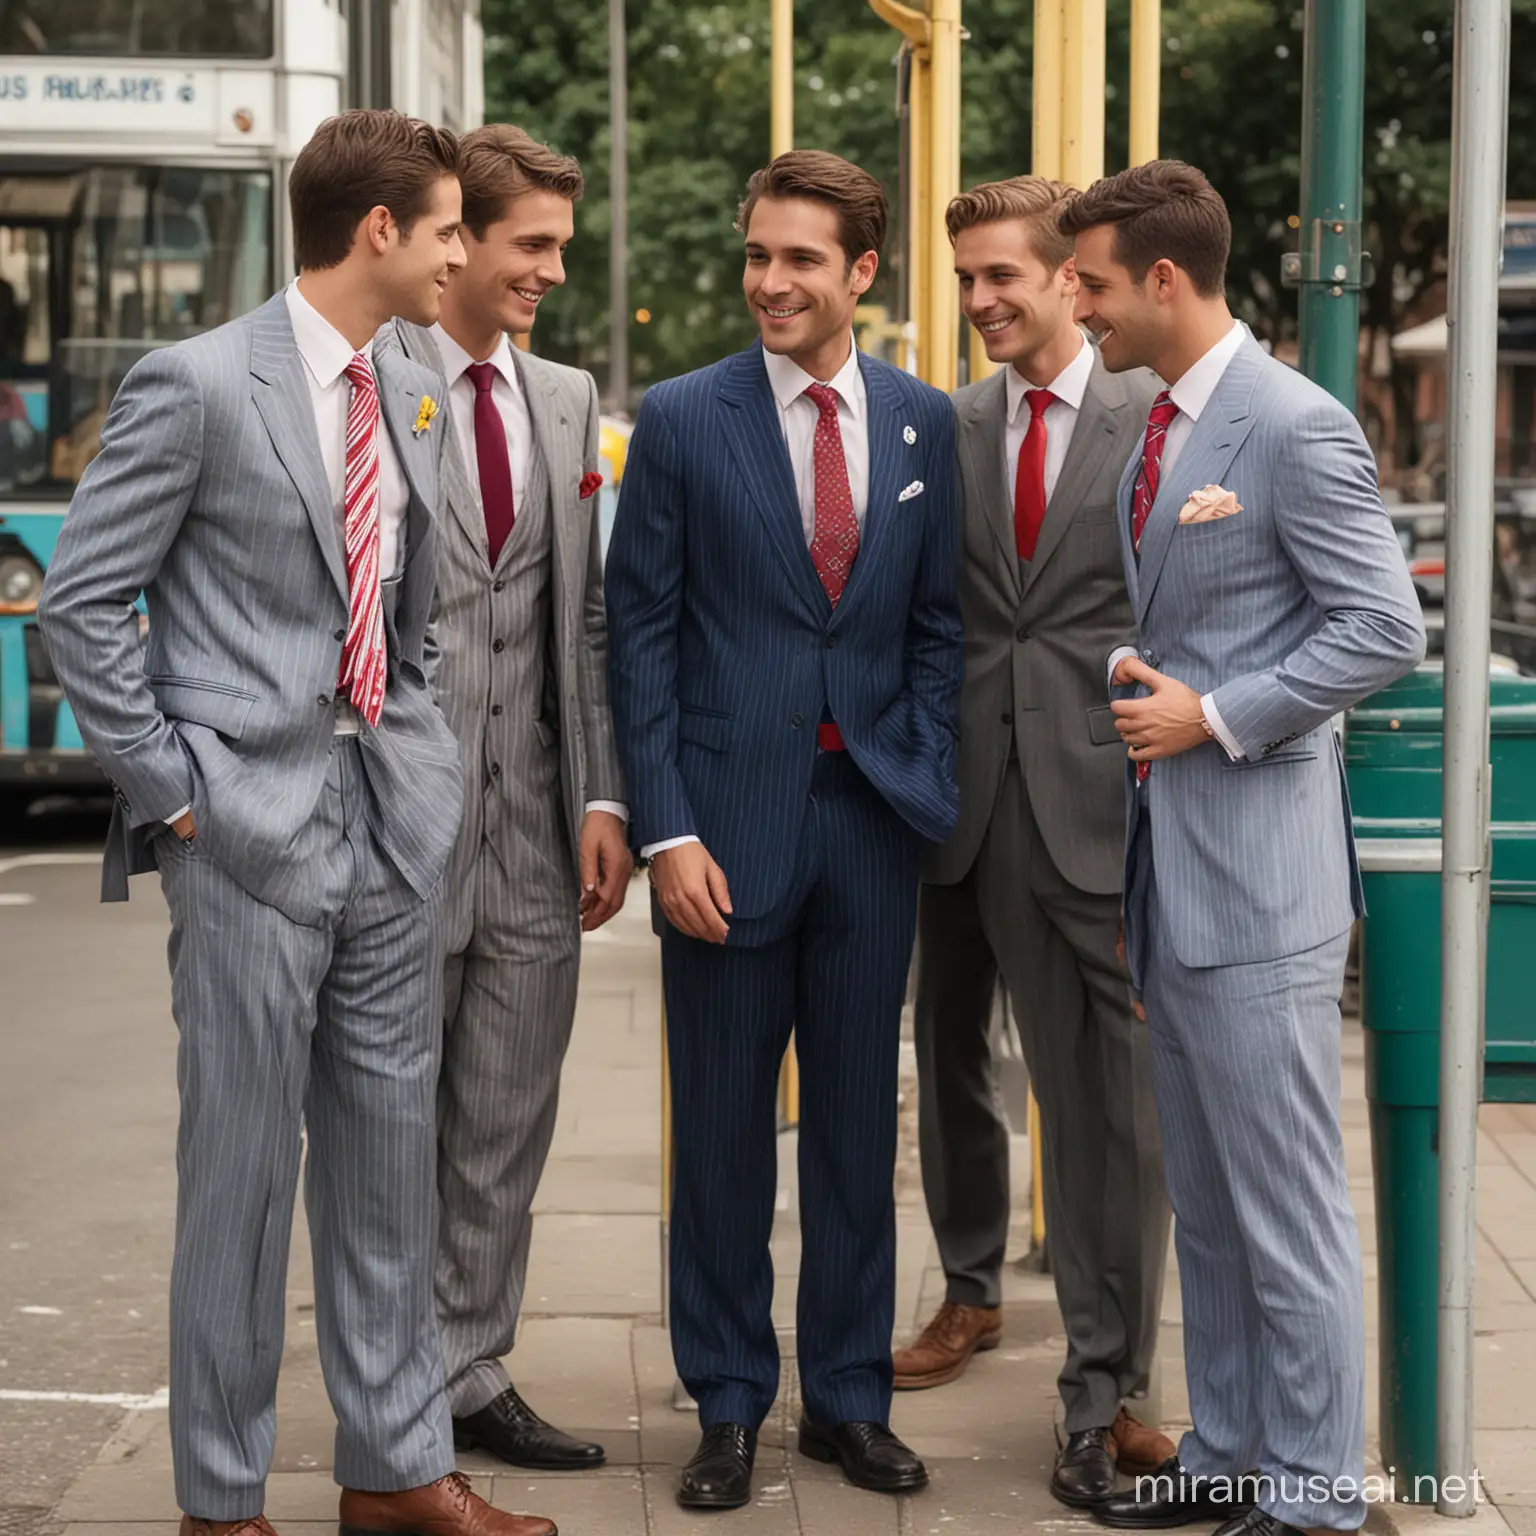 4 men, at a bus stop, wearing bright pinstripe suit and tie, flirting
